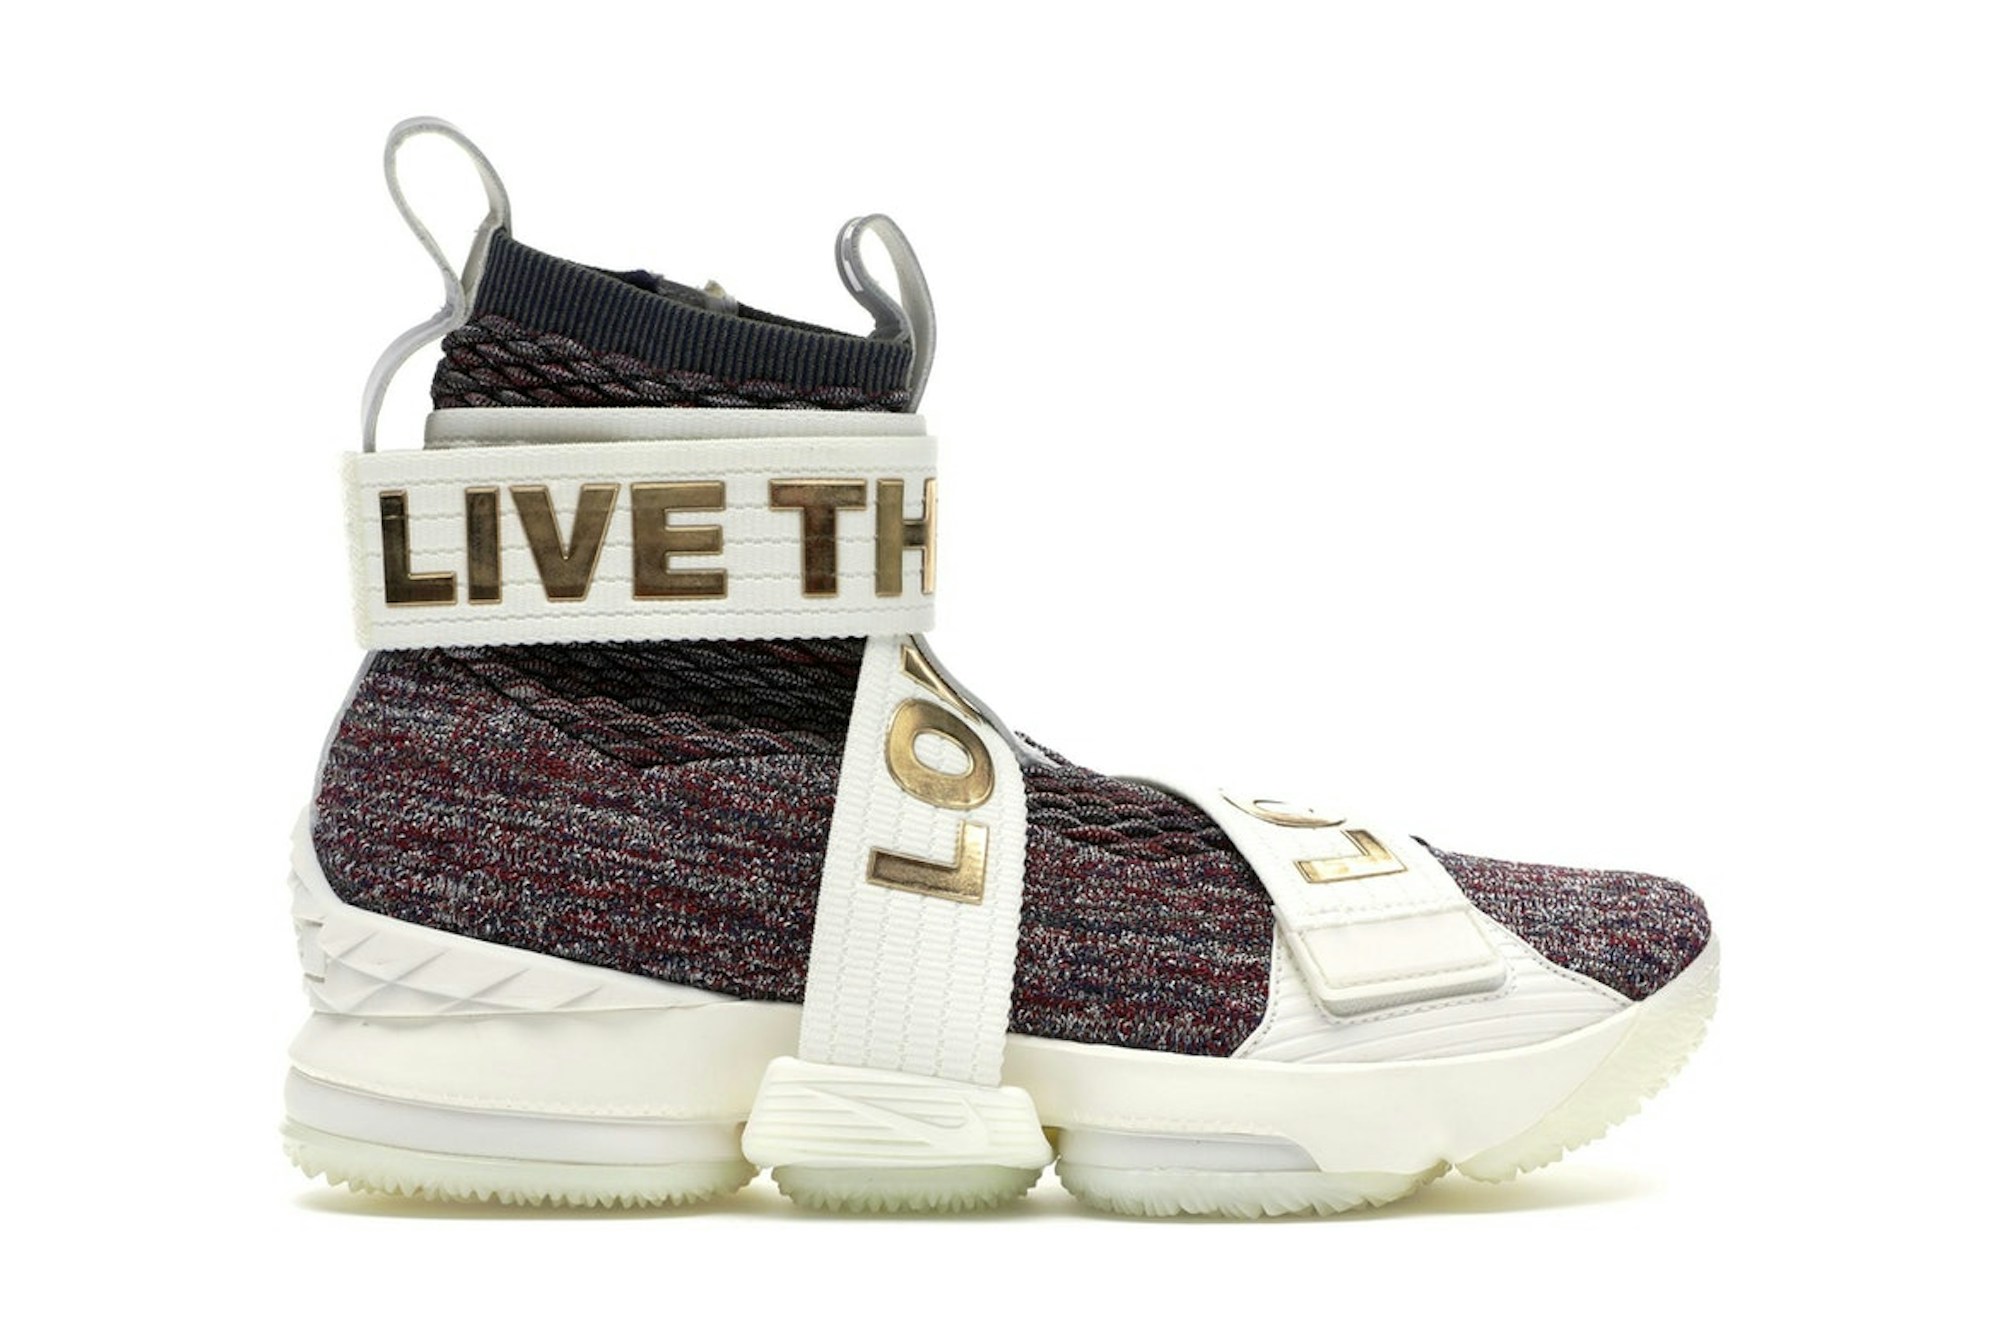 Nike LeBron 15 Lifestyle KITH Stained Glass - AO1068-900